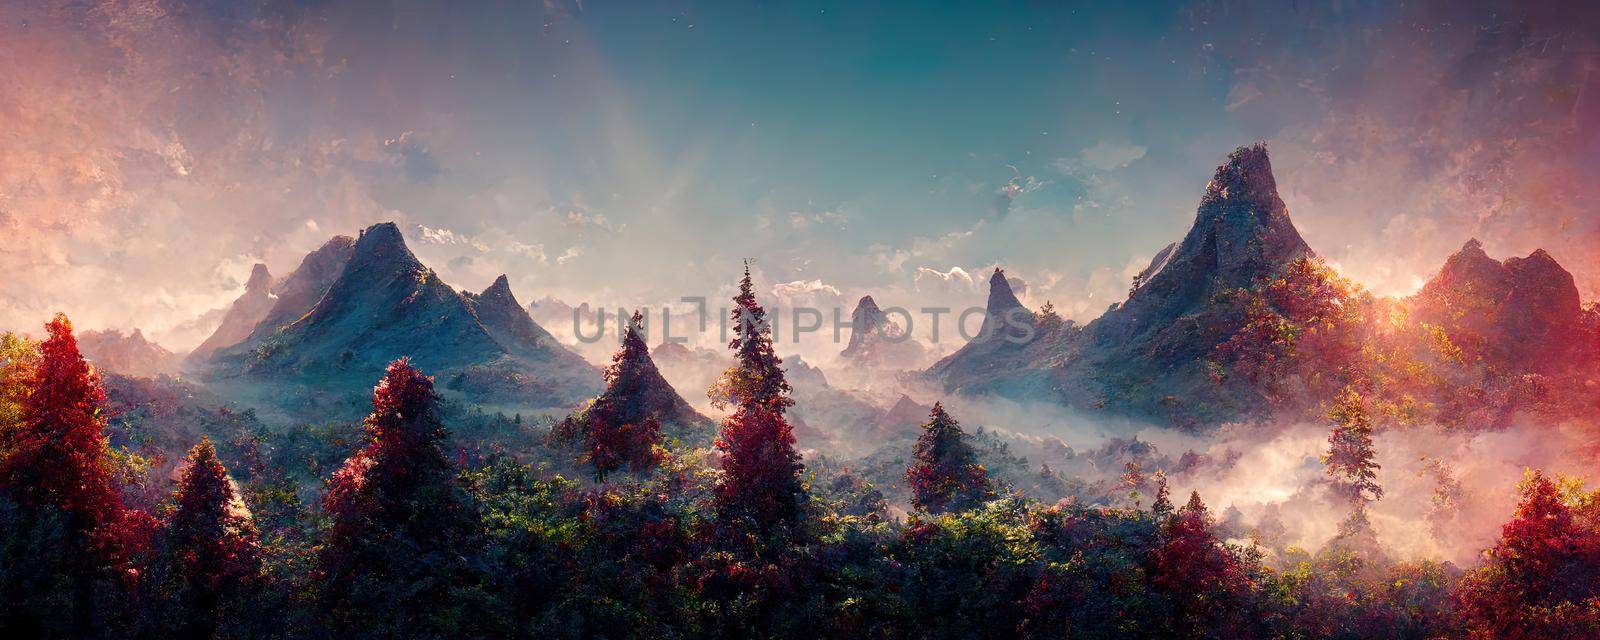 Magic fairy tale landscape of mountains in lilac fog by TRMK